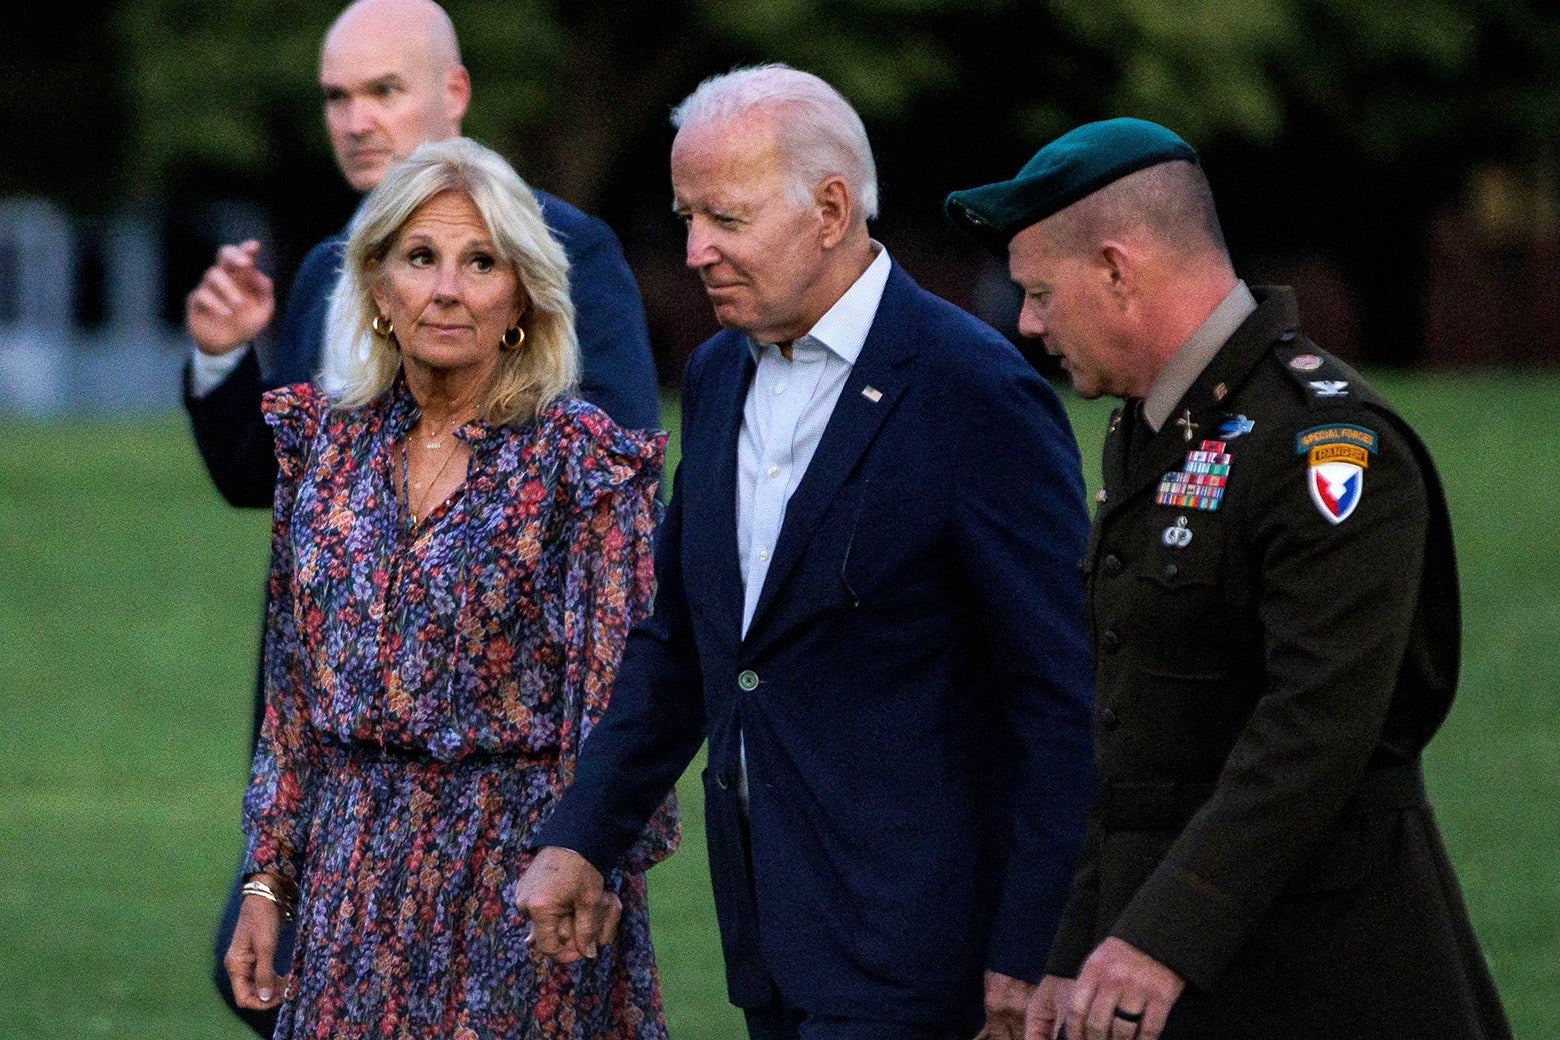 Joe Biden, accompanied by a military valet and members of his security team, holds his wife Jill's hand as they walk across the White House lawn in the darkening light of a summer evening.